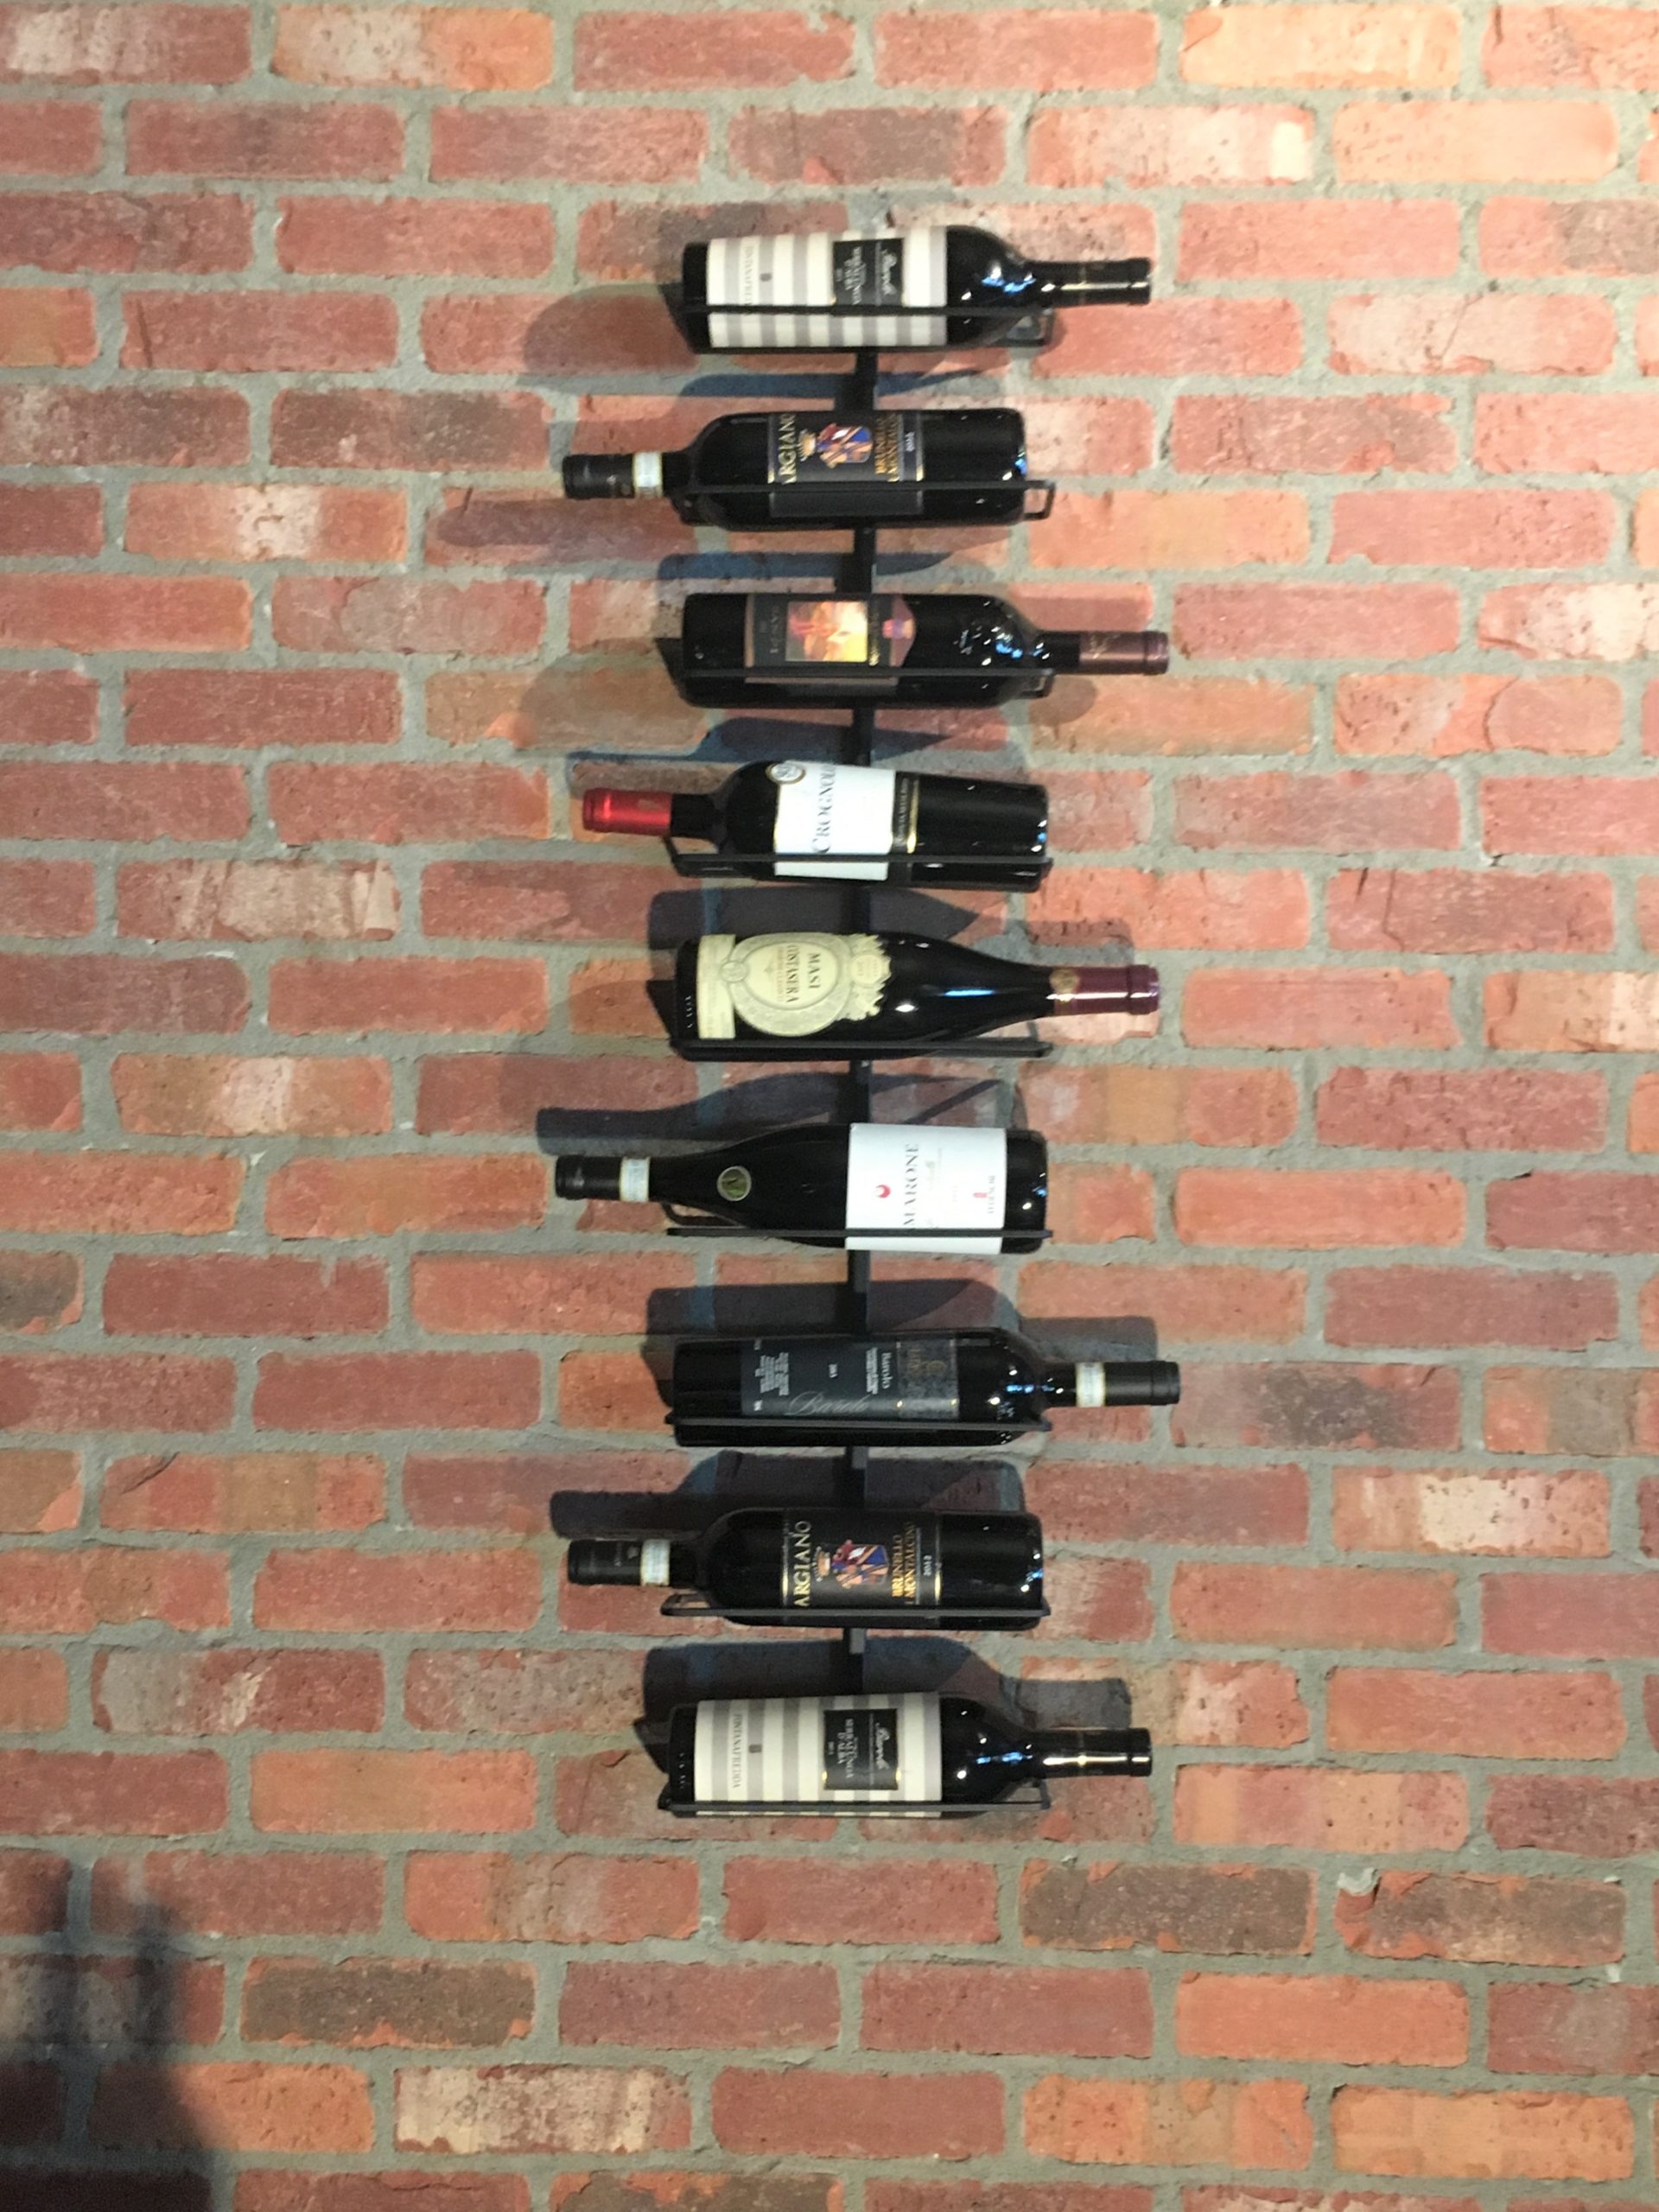 https://carmelos.ca/wp-content/uploads/2020/11/Wine-Wall-scaled.jpg